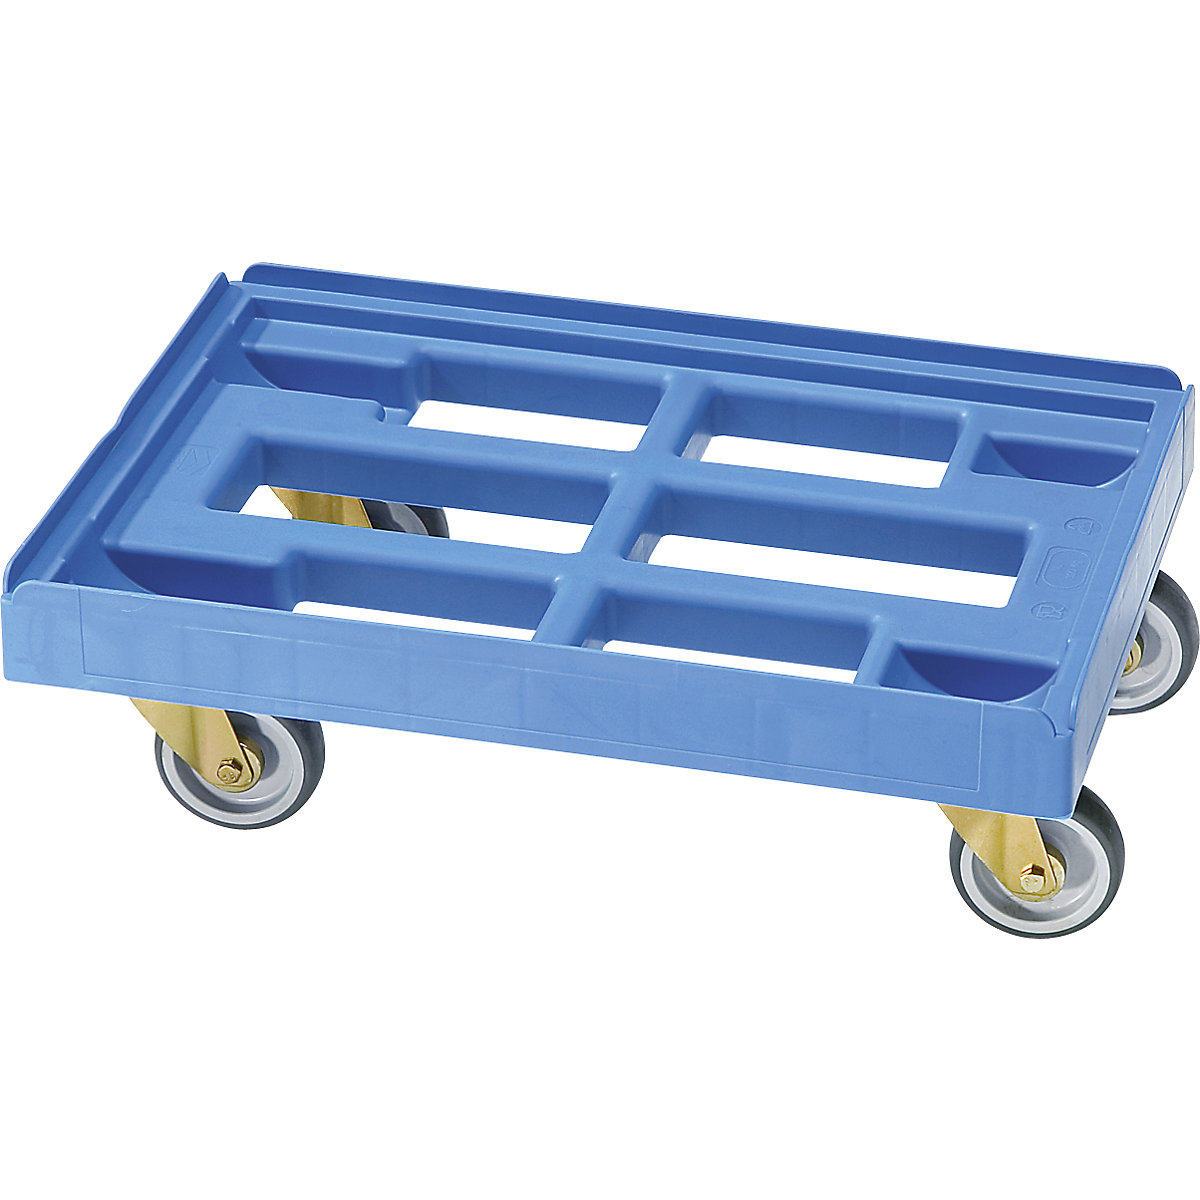 Transport dolly, LxW 610 x 410 mm, made of HDPE, light blue, 5+ items-7